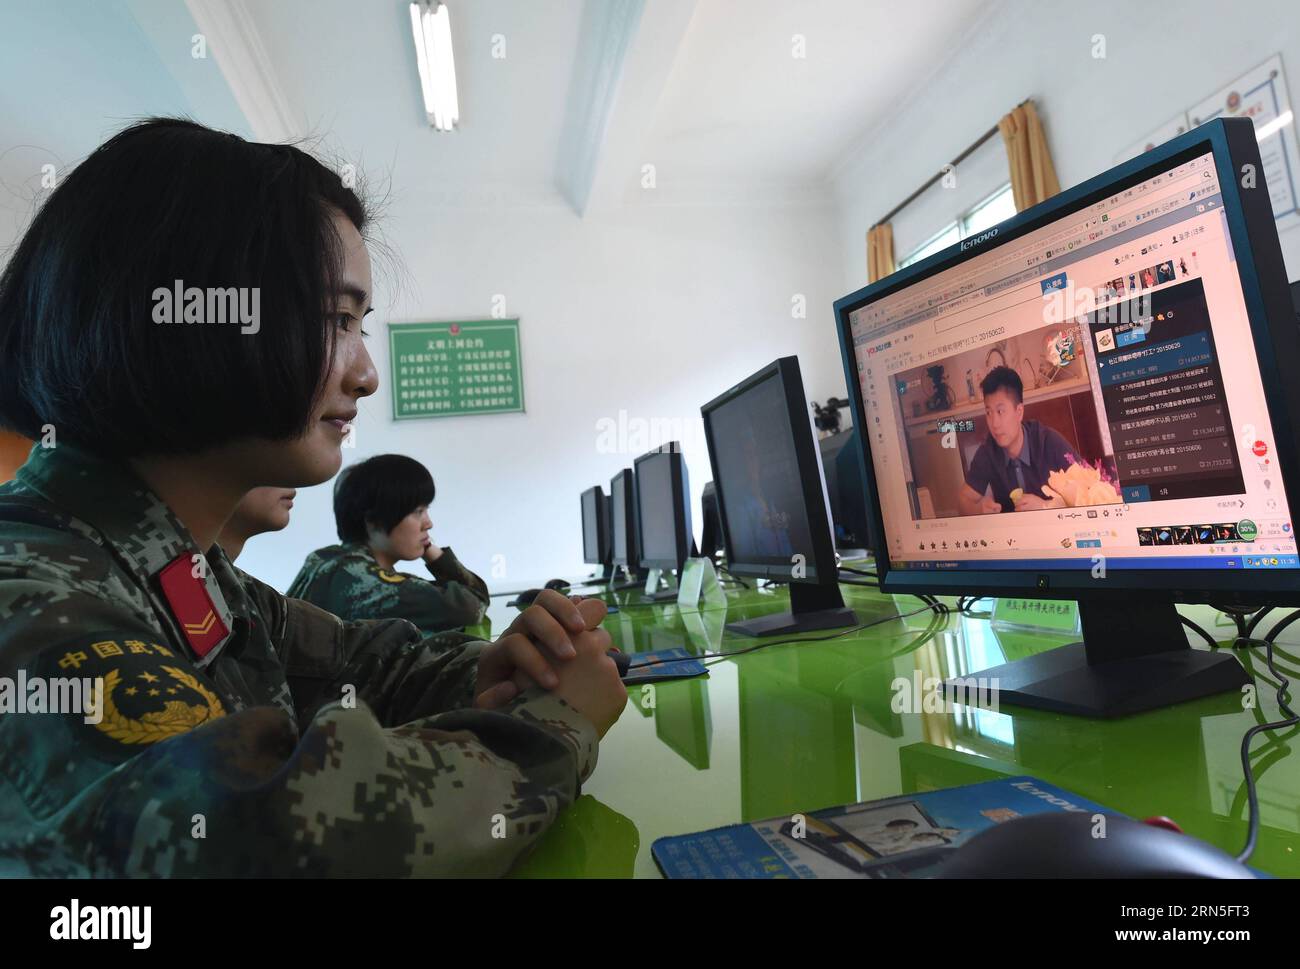 DEHONG, June 24, 2015 -- Zhang Liu watches videos on the internet at the border checkpoint of Mukang in Dehong Dai-Jingpo Autonomous Prefecture, southwest China s Yunnan Province, June 24, 2015. Born in 1995, Zhang Liu became an anti-drug soldier in border checkpoint of Mukang in 2013. Grown up in an affluent family in central China s Hunan Province, Zhang said that being a soldier had always been her dream, which drove her to join the army after graduating from high school. Being a front line anti-drug force, the border checkpoint of Mukang has captured about 100 kilograms of drugs since the Stock Photo